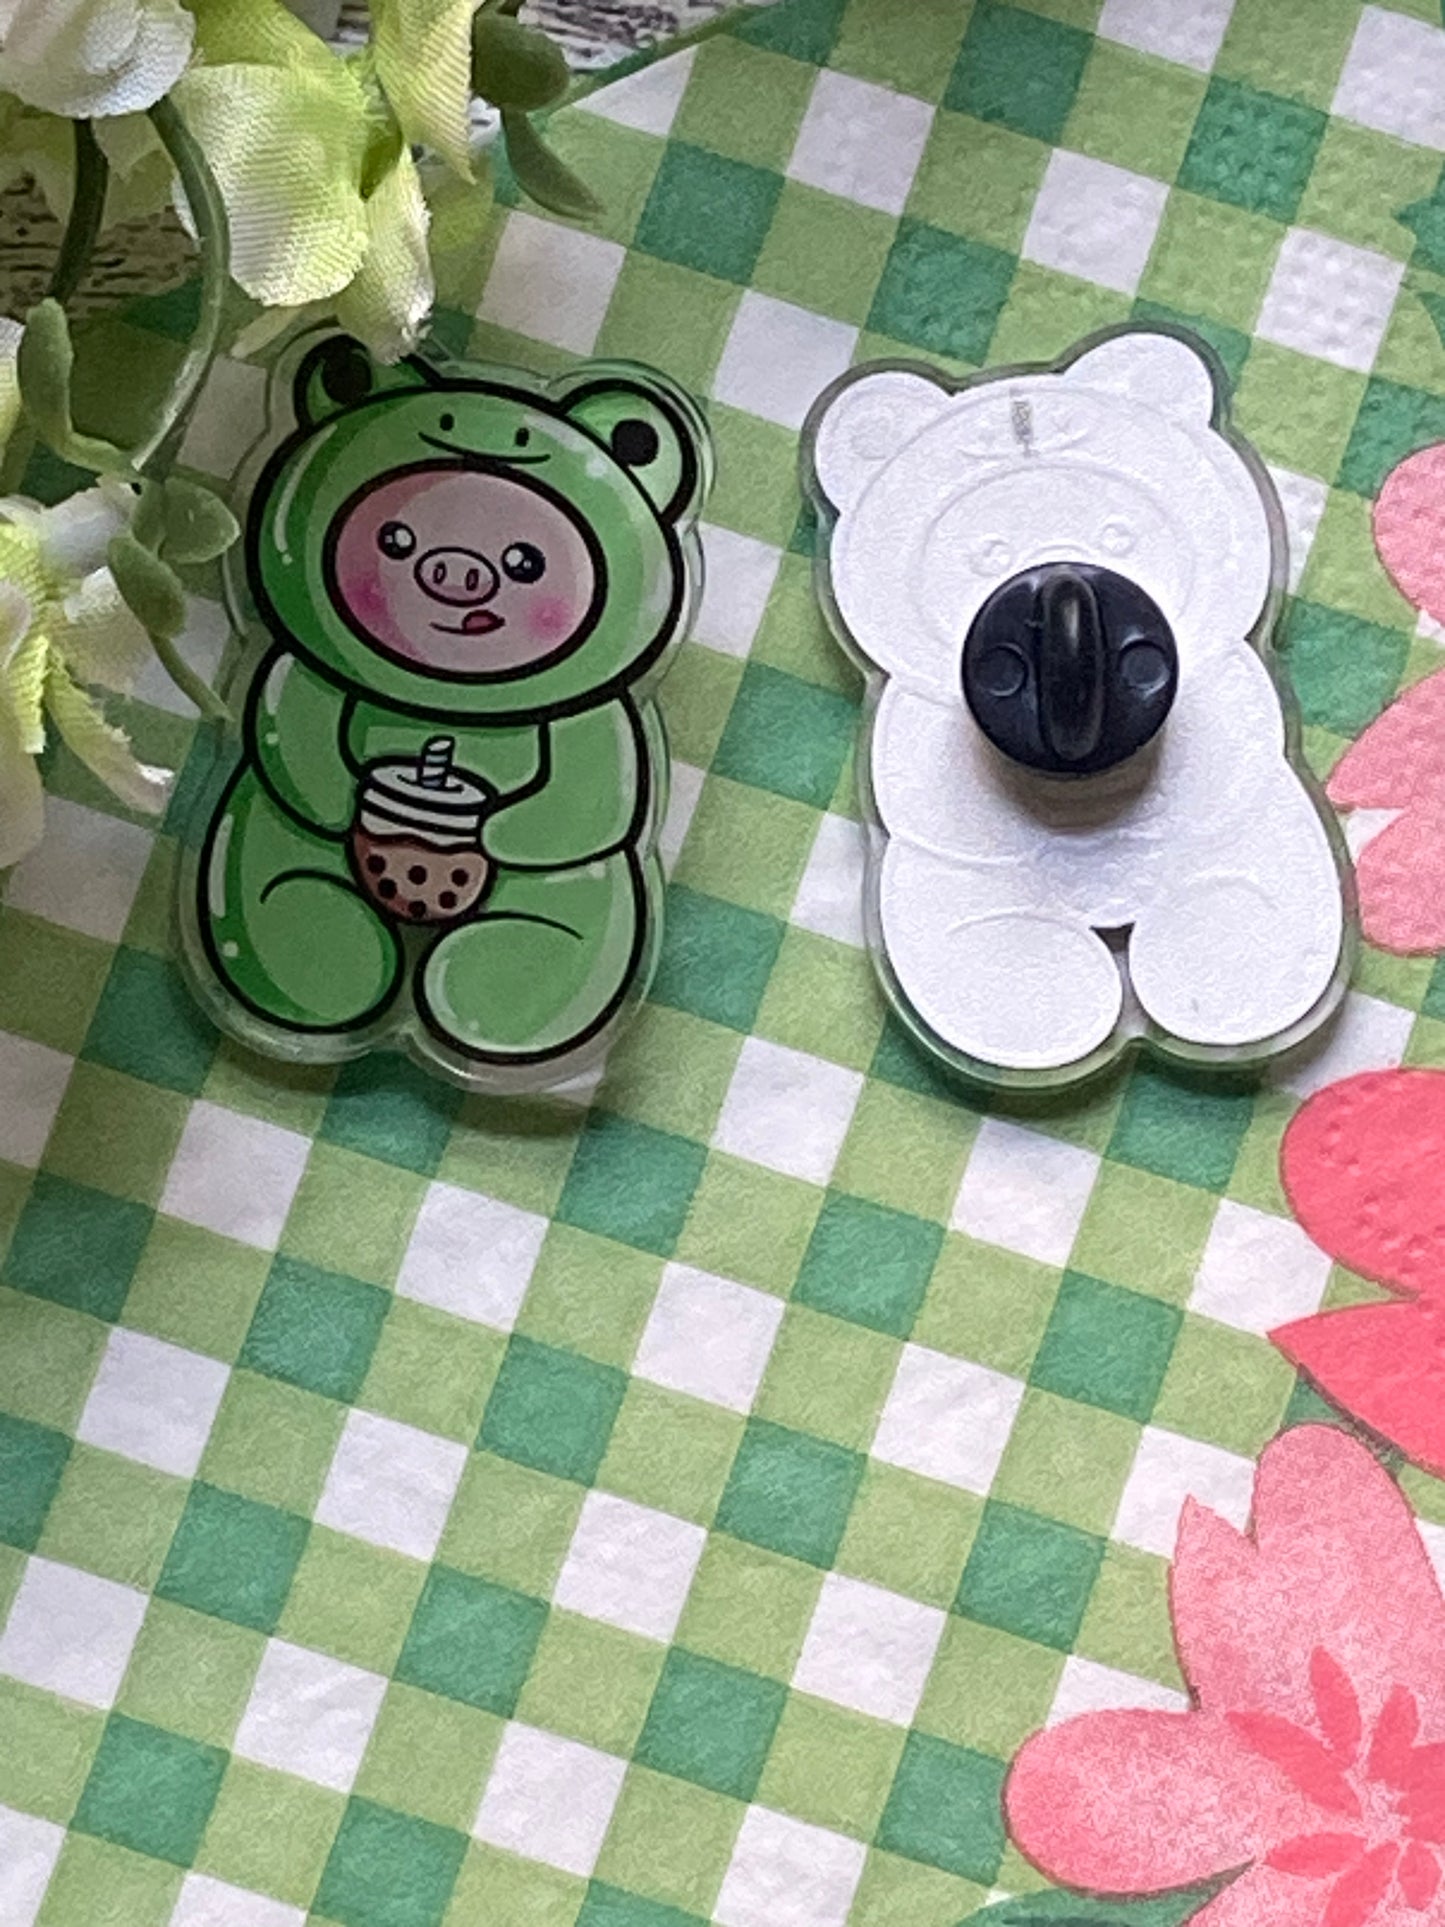 Piggy in frog costume PINS